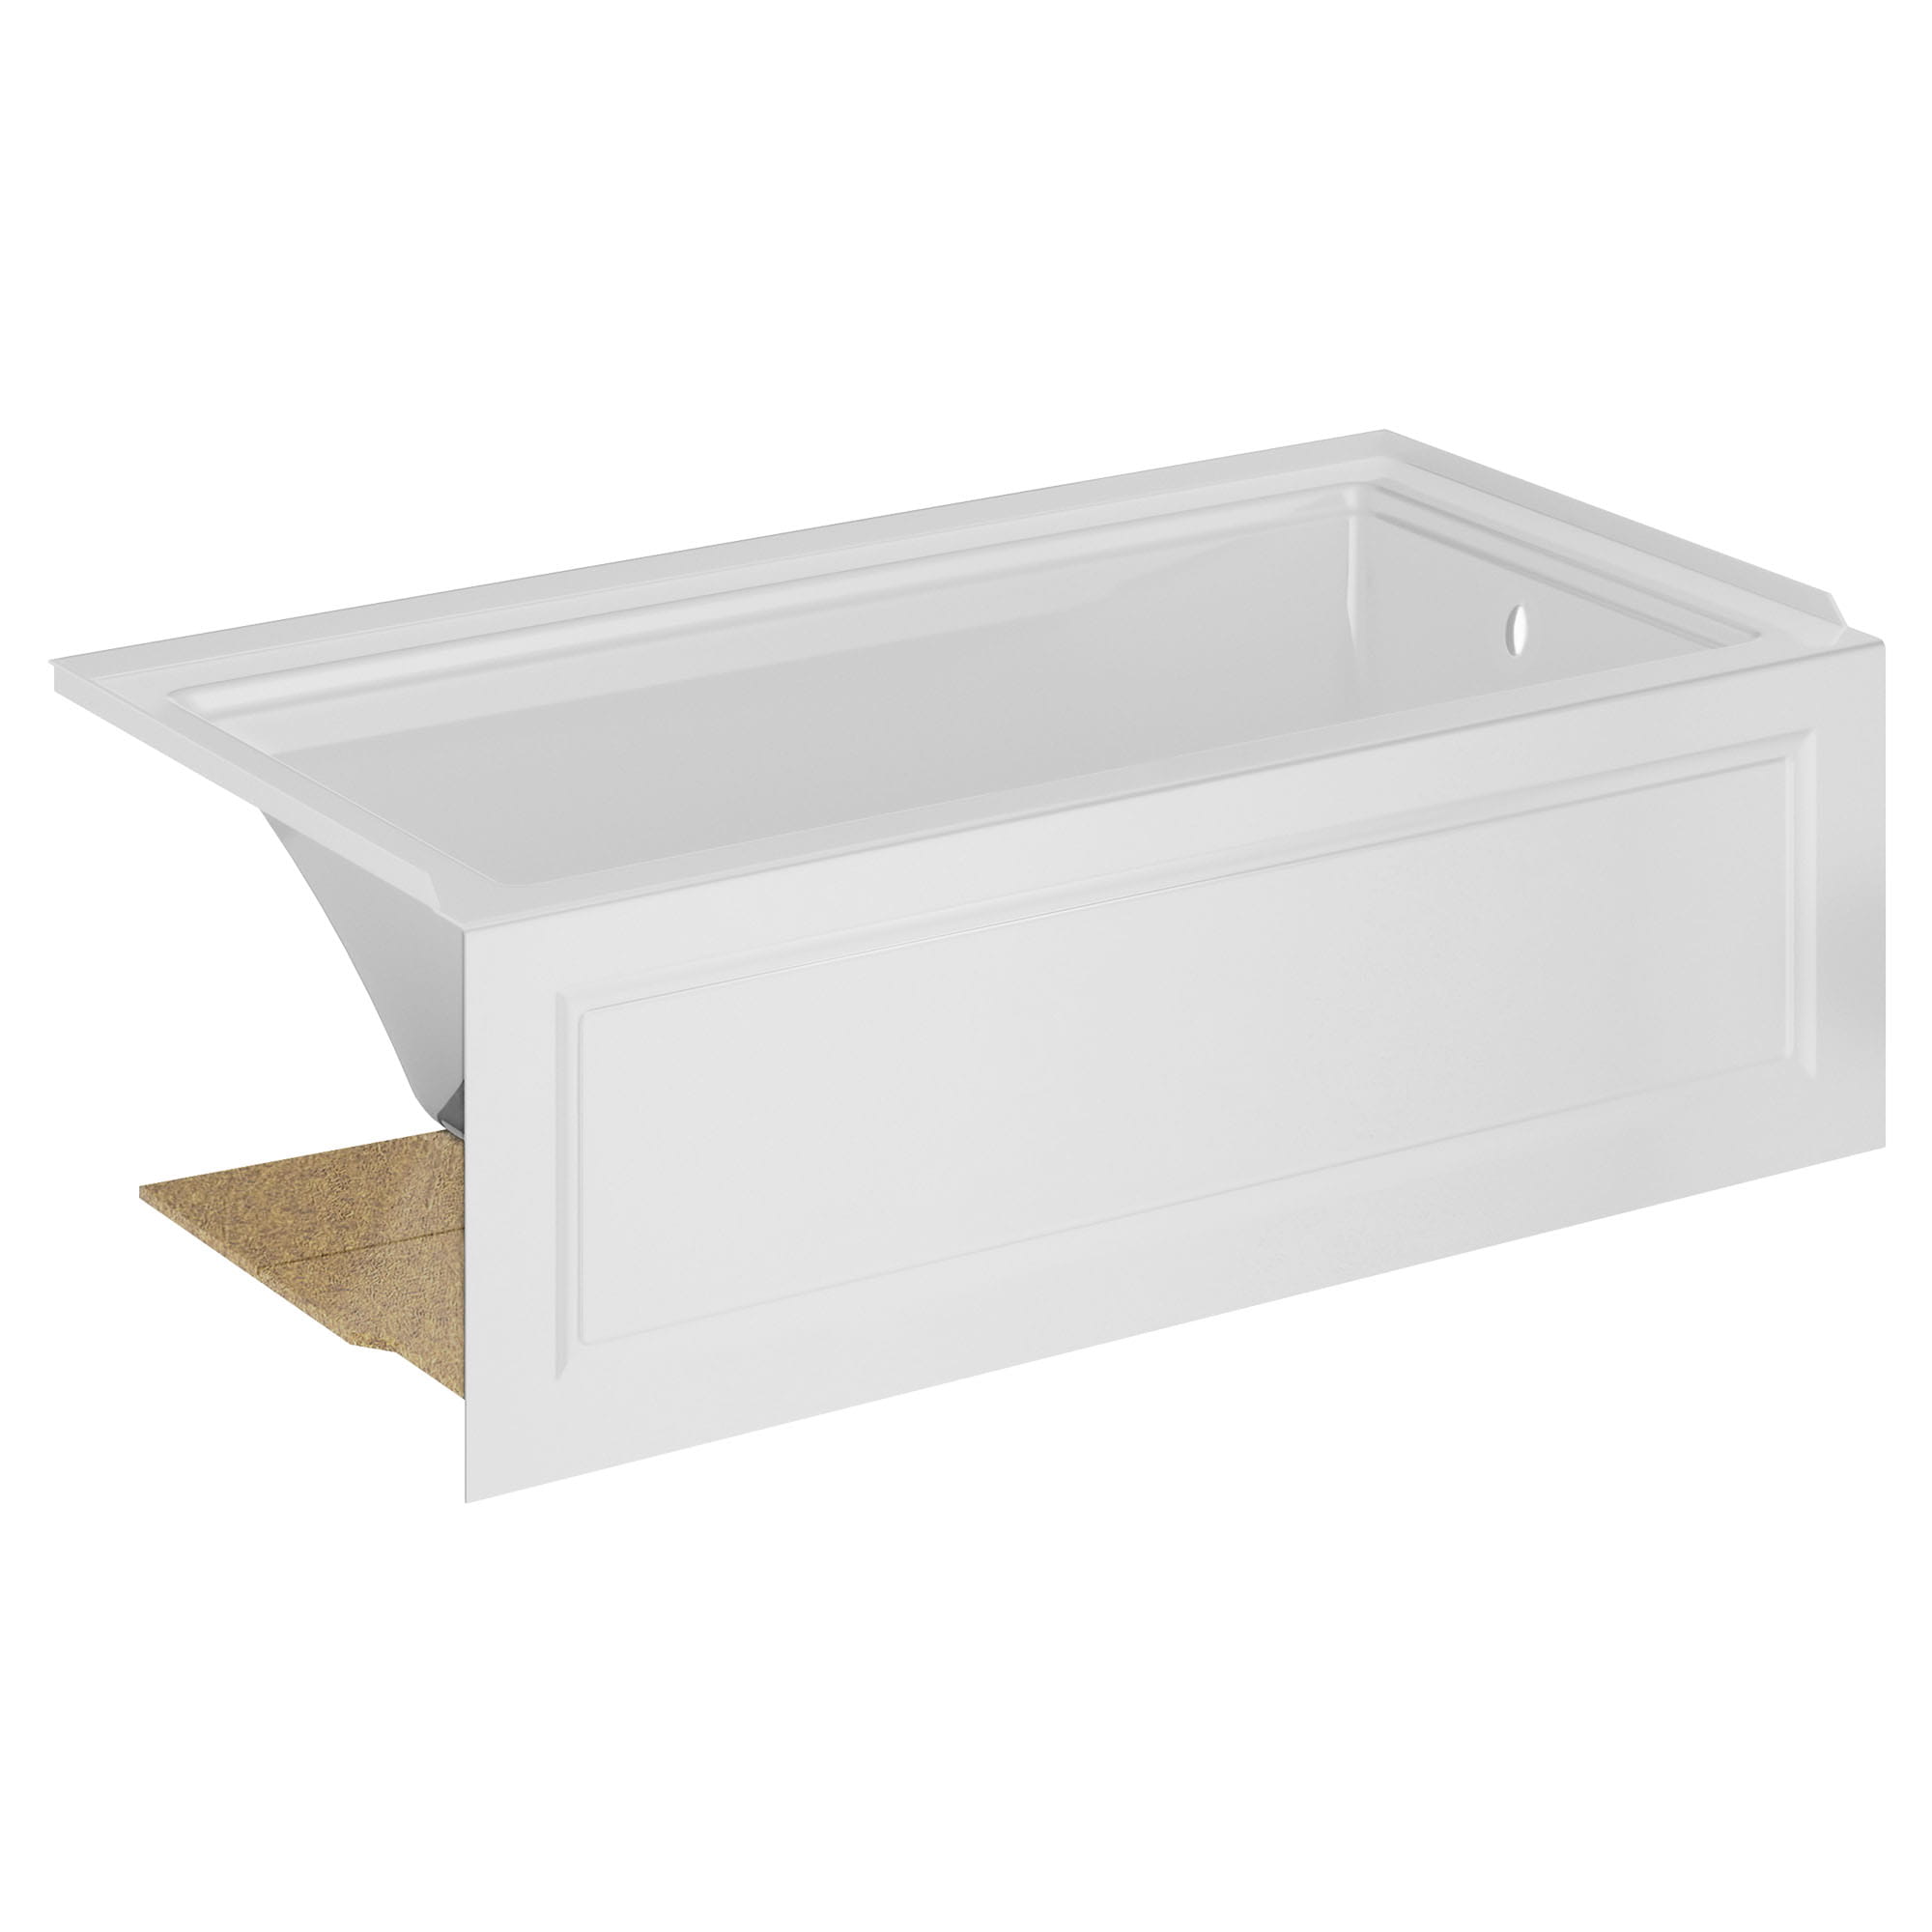 Town Square® S 60 x 32-Inch Integral Apron Bathtub With Right-Hand Outlet